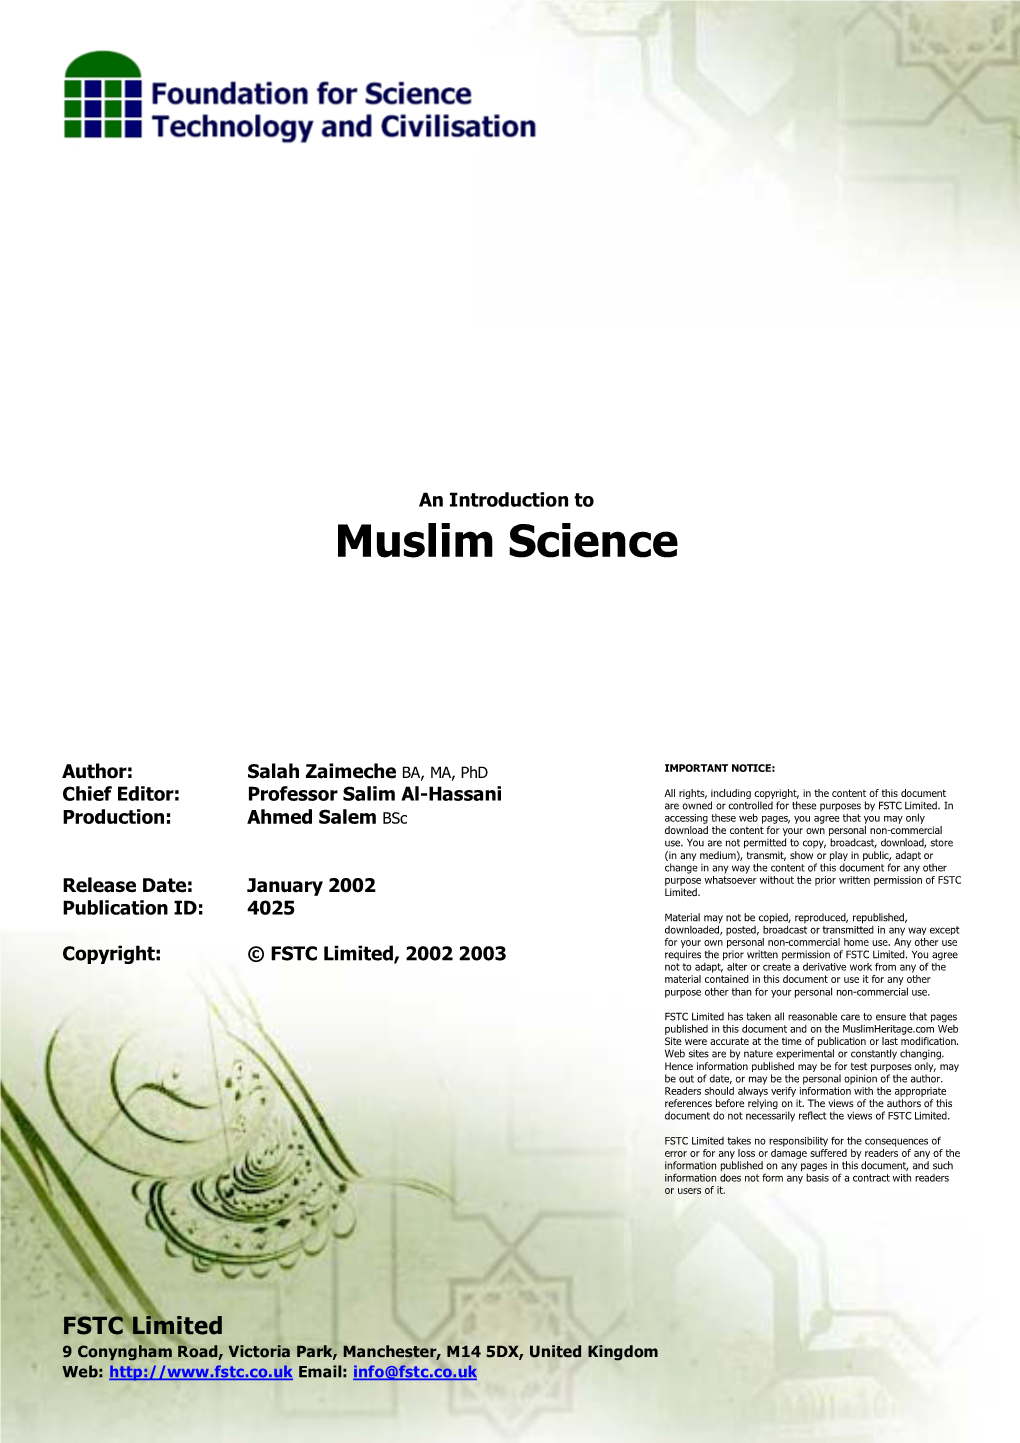 An Introduction to Muslim Science